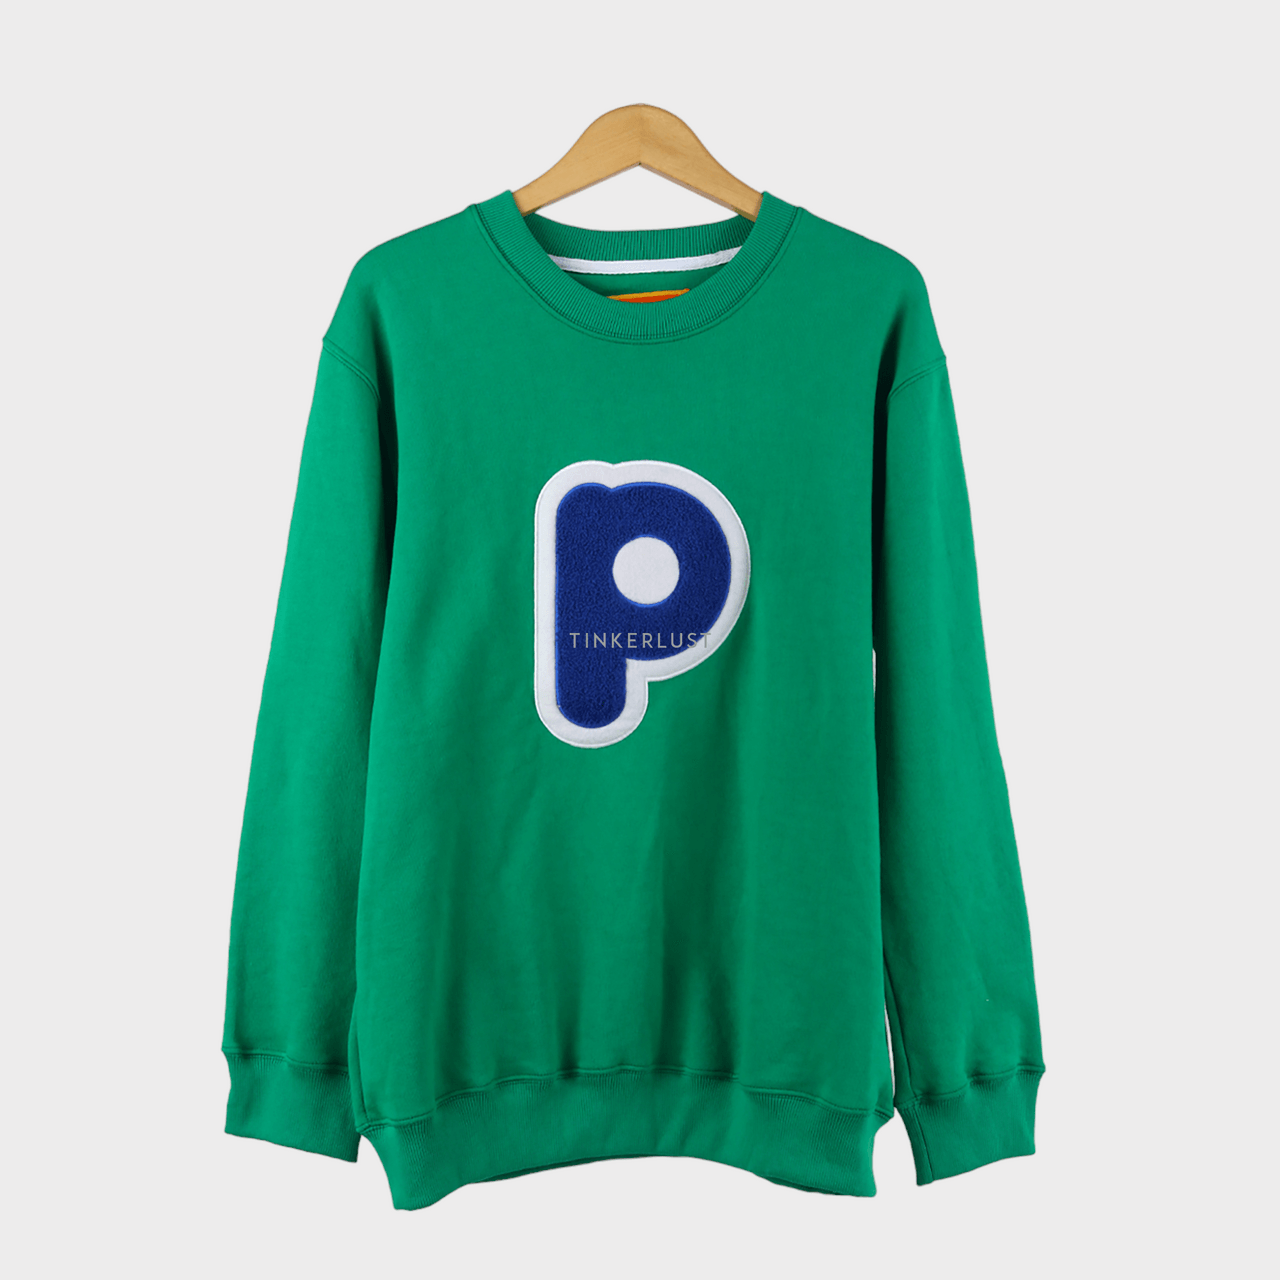 Play With Pattero Green Sweater